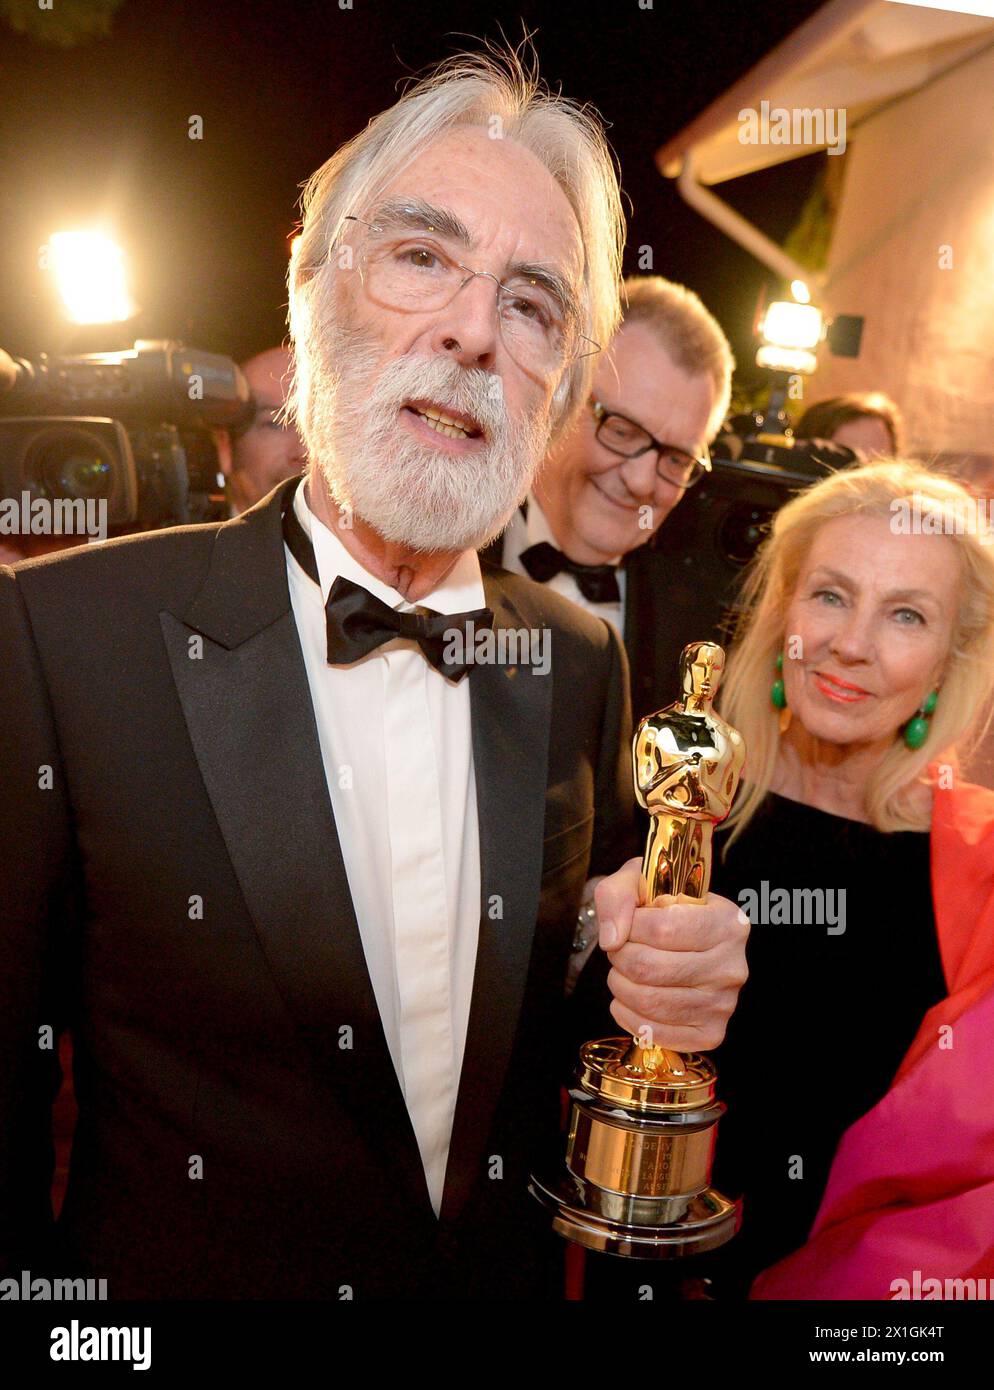 Austrian director Michael Haneke received an Oscar for Best Foreign Language Film of the Year for 'Amour' during the 85th Academy Awards at the Dolby Theatre in Hollywood, California, USA, 24 February 2013.    PICTURE: Michael Haneke and his wife Susanne. - 20130225 PD0309 - Rechteinfo: Rights Managed (RM) Stock Photo